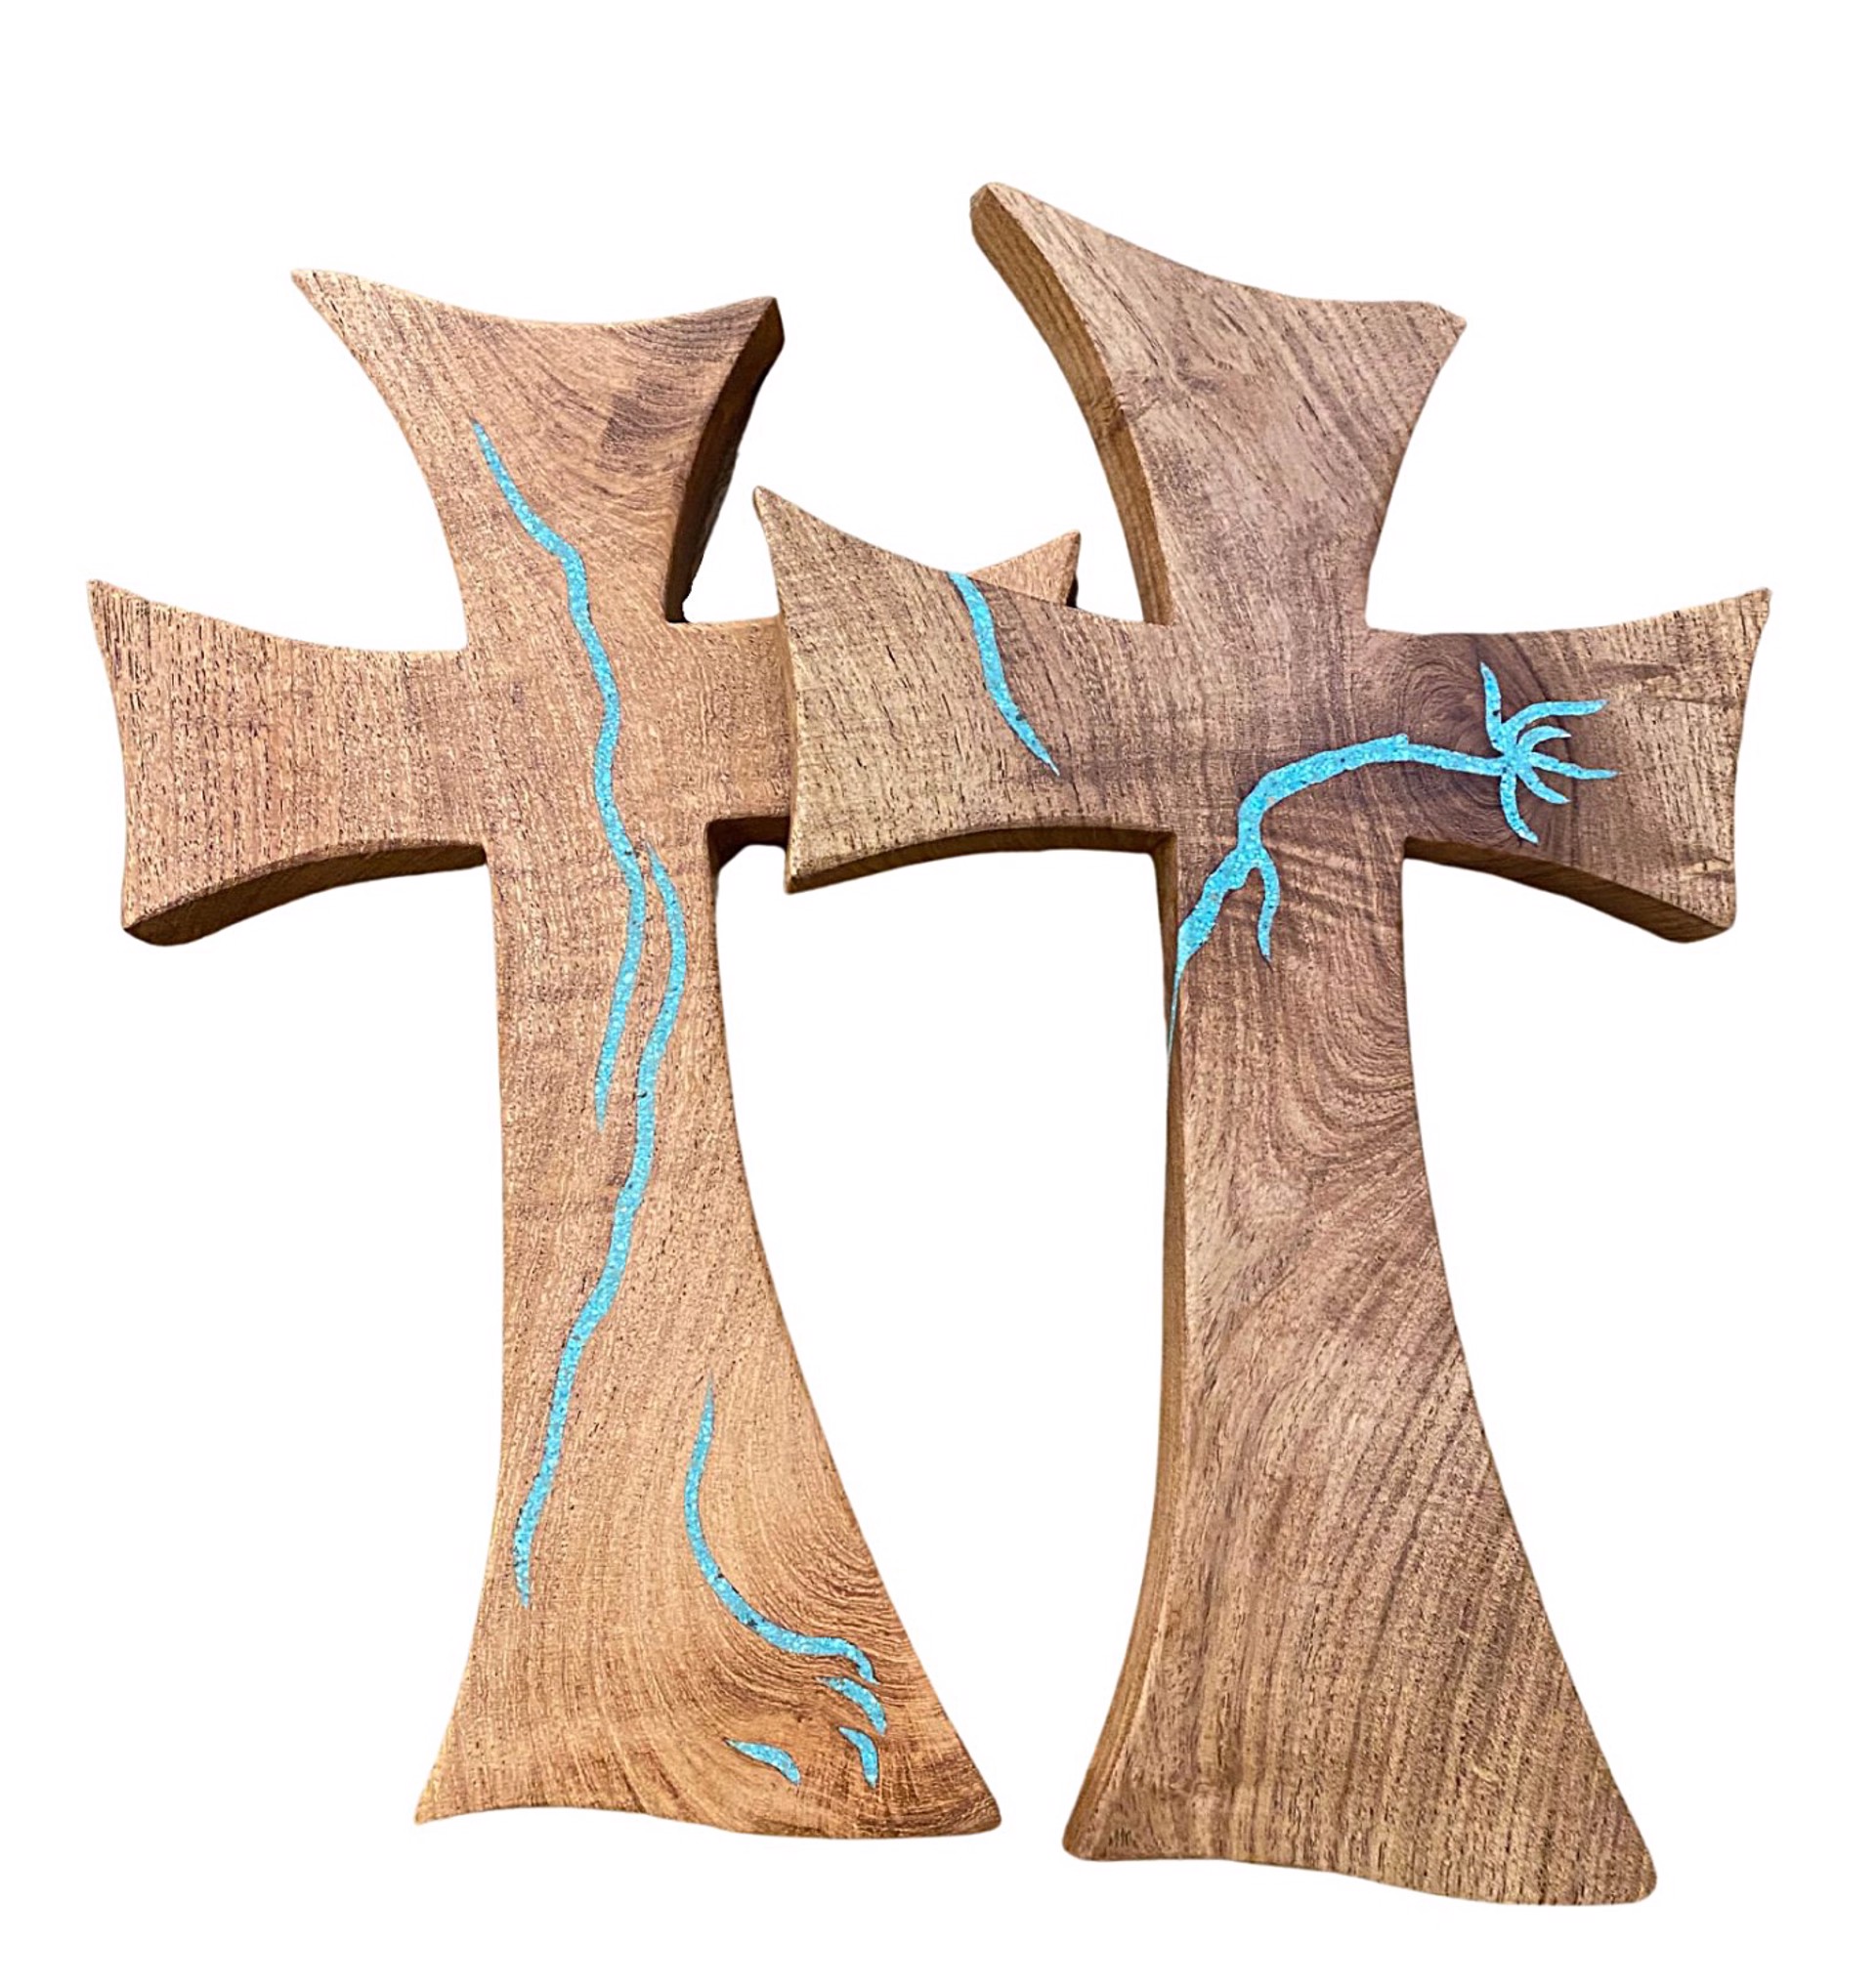 Mesquite Cross with Inlay by TreeStump Woodcraft